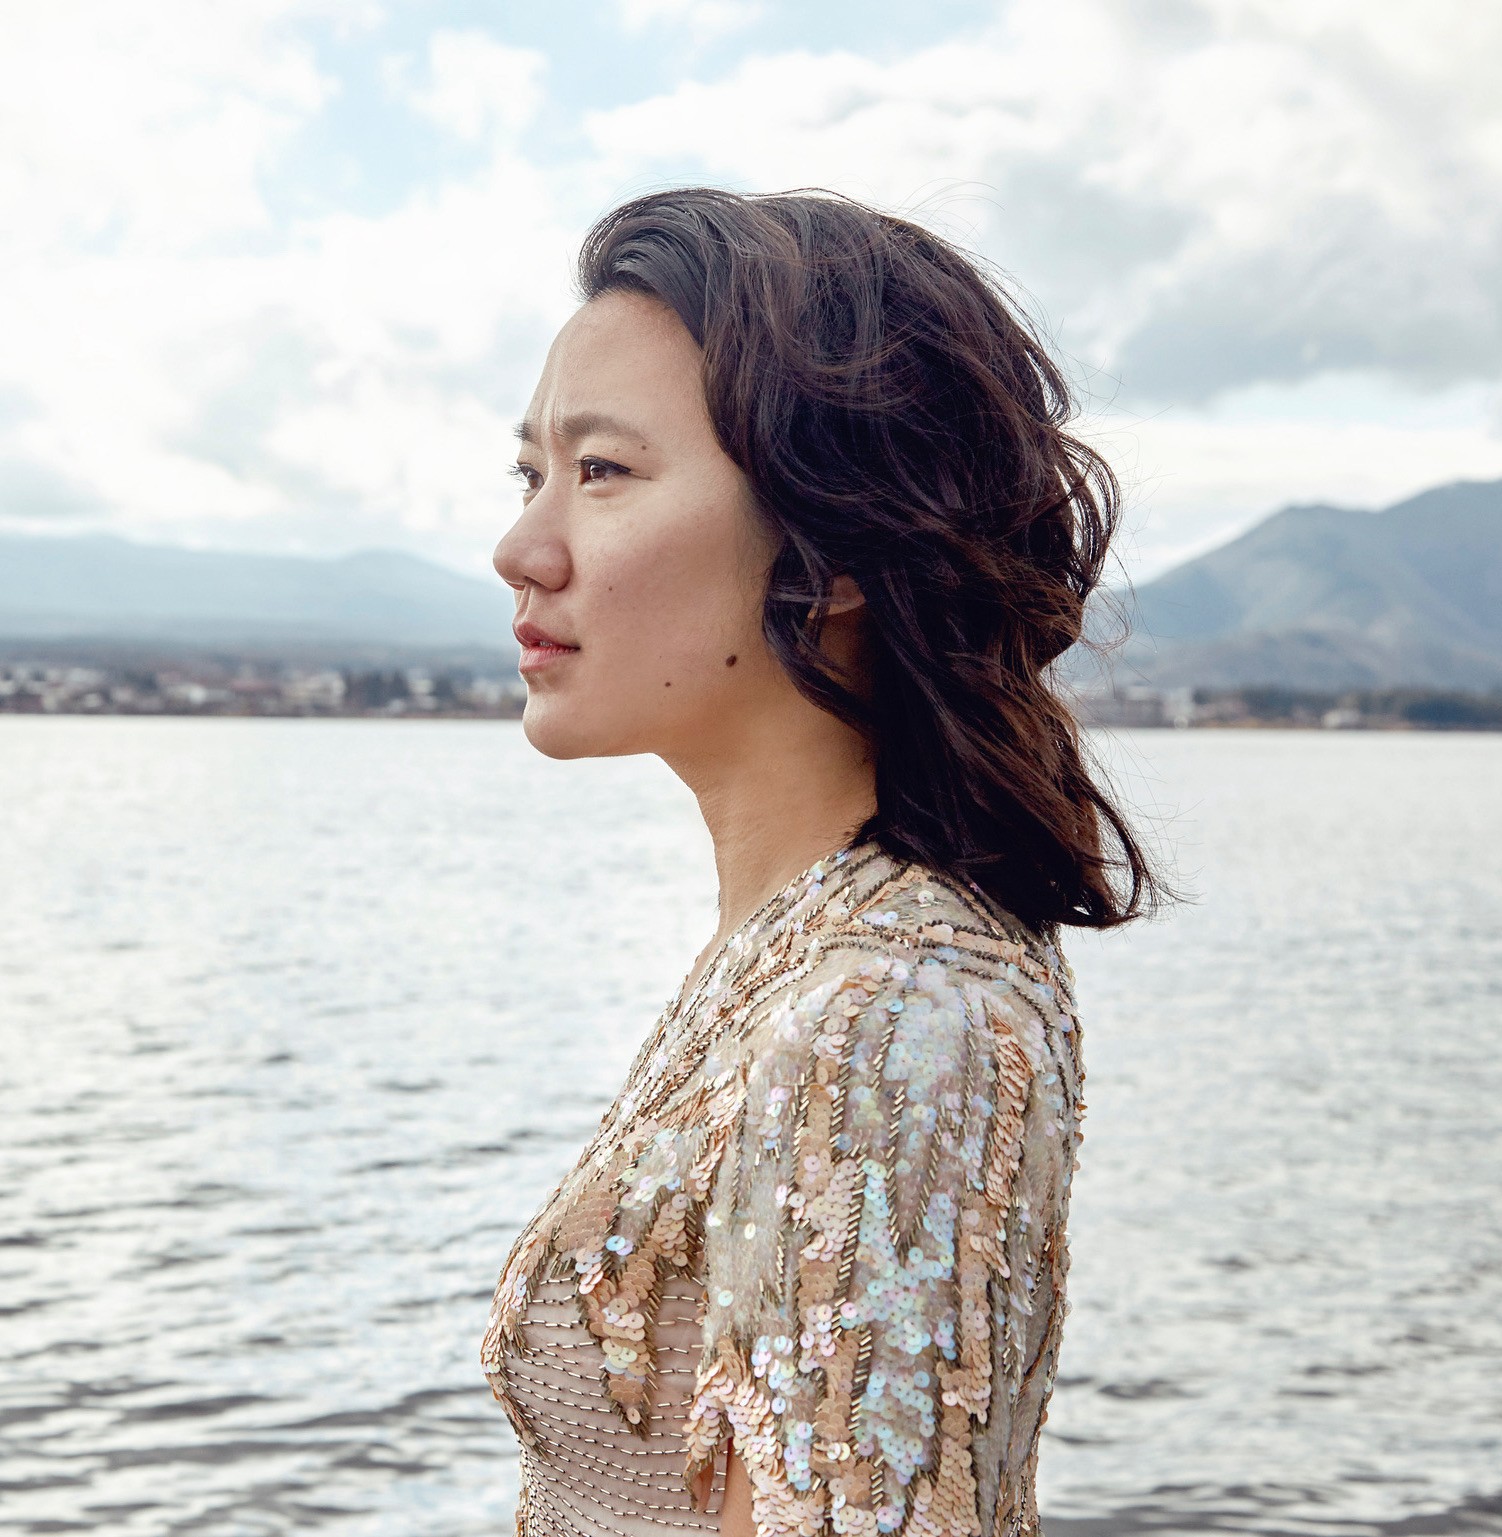 Diana Khoi Nguyen wears a sequined shirt, standing next to a body of water, looking into the distance